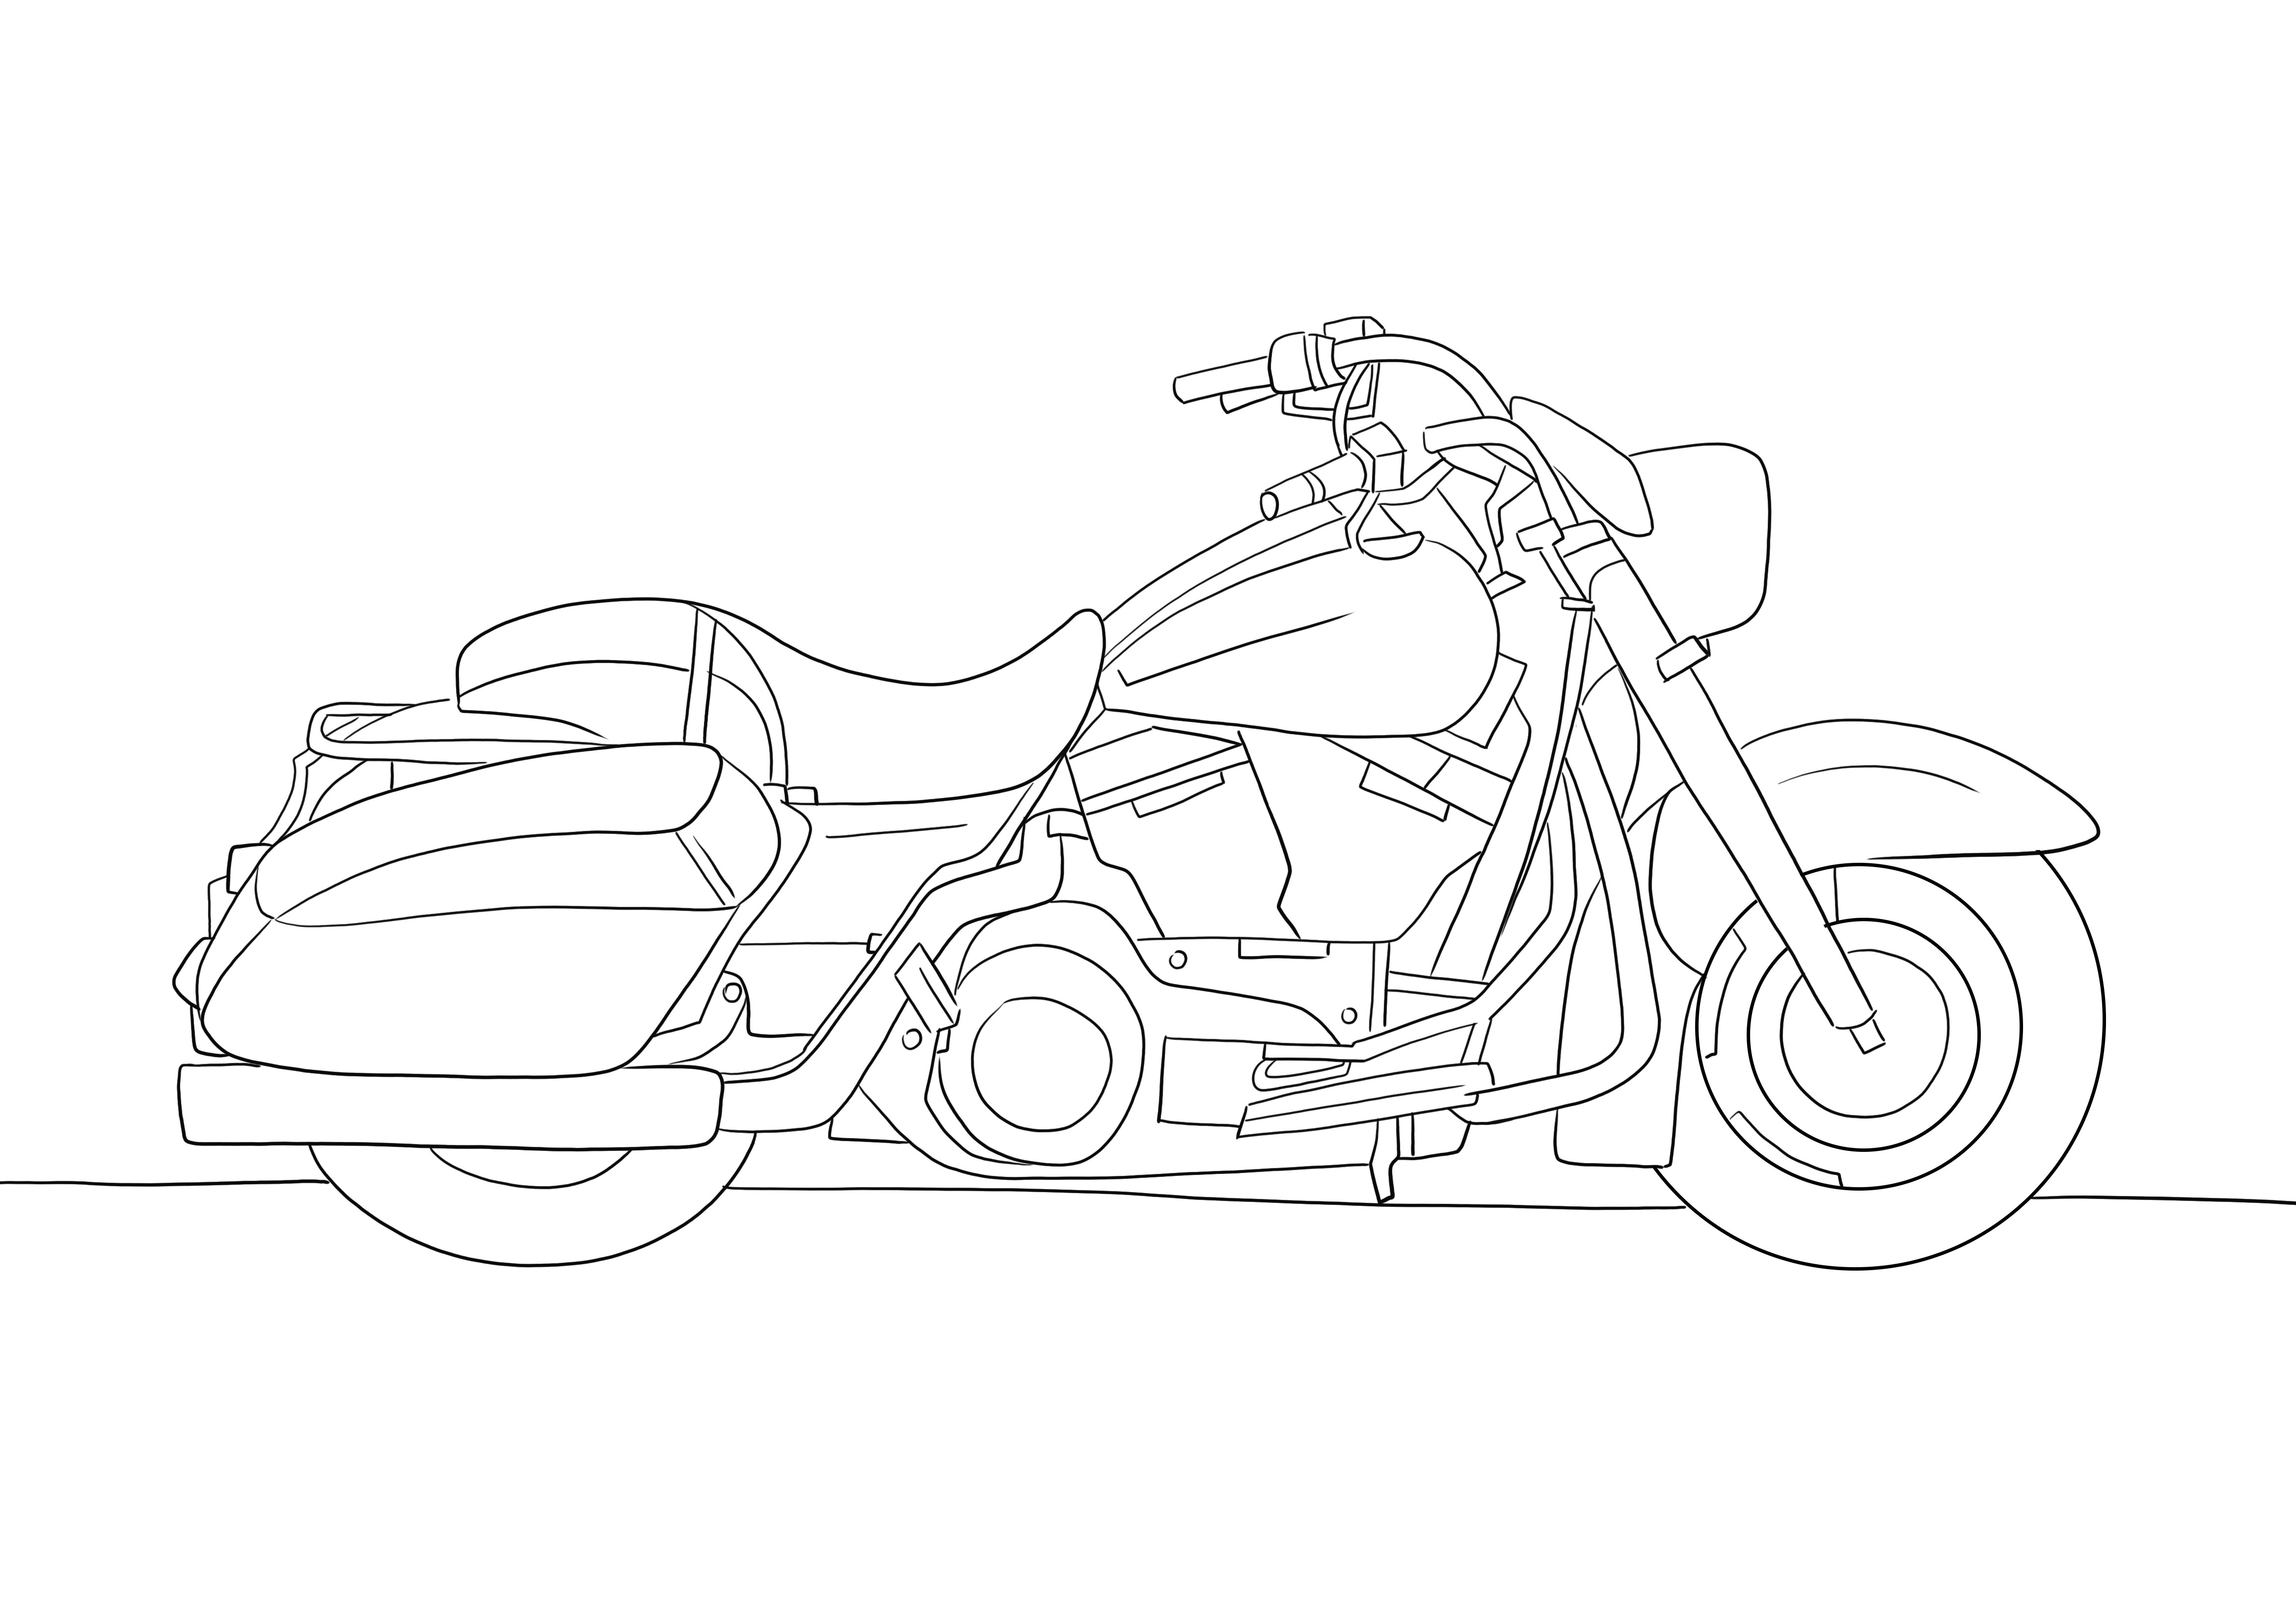 A print free of Harley Davidson Road King coloring sheet for kids to have fun